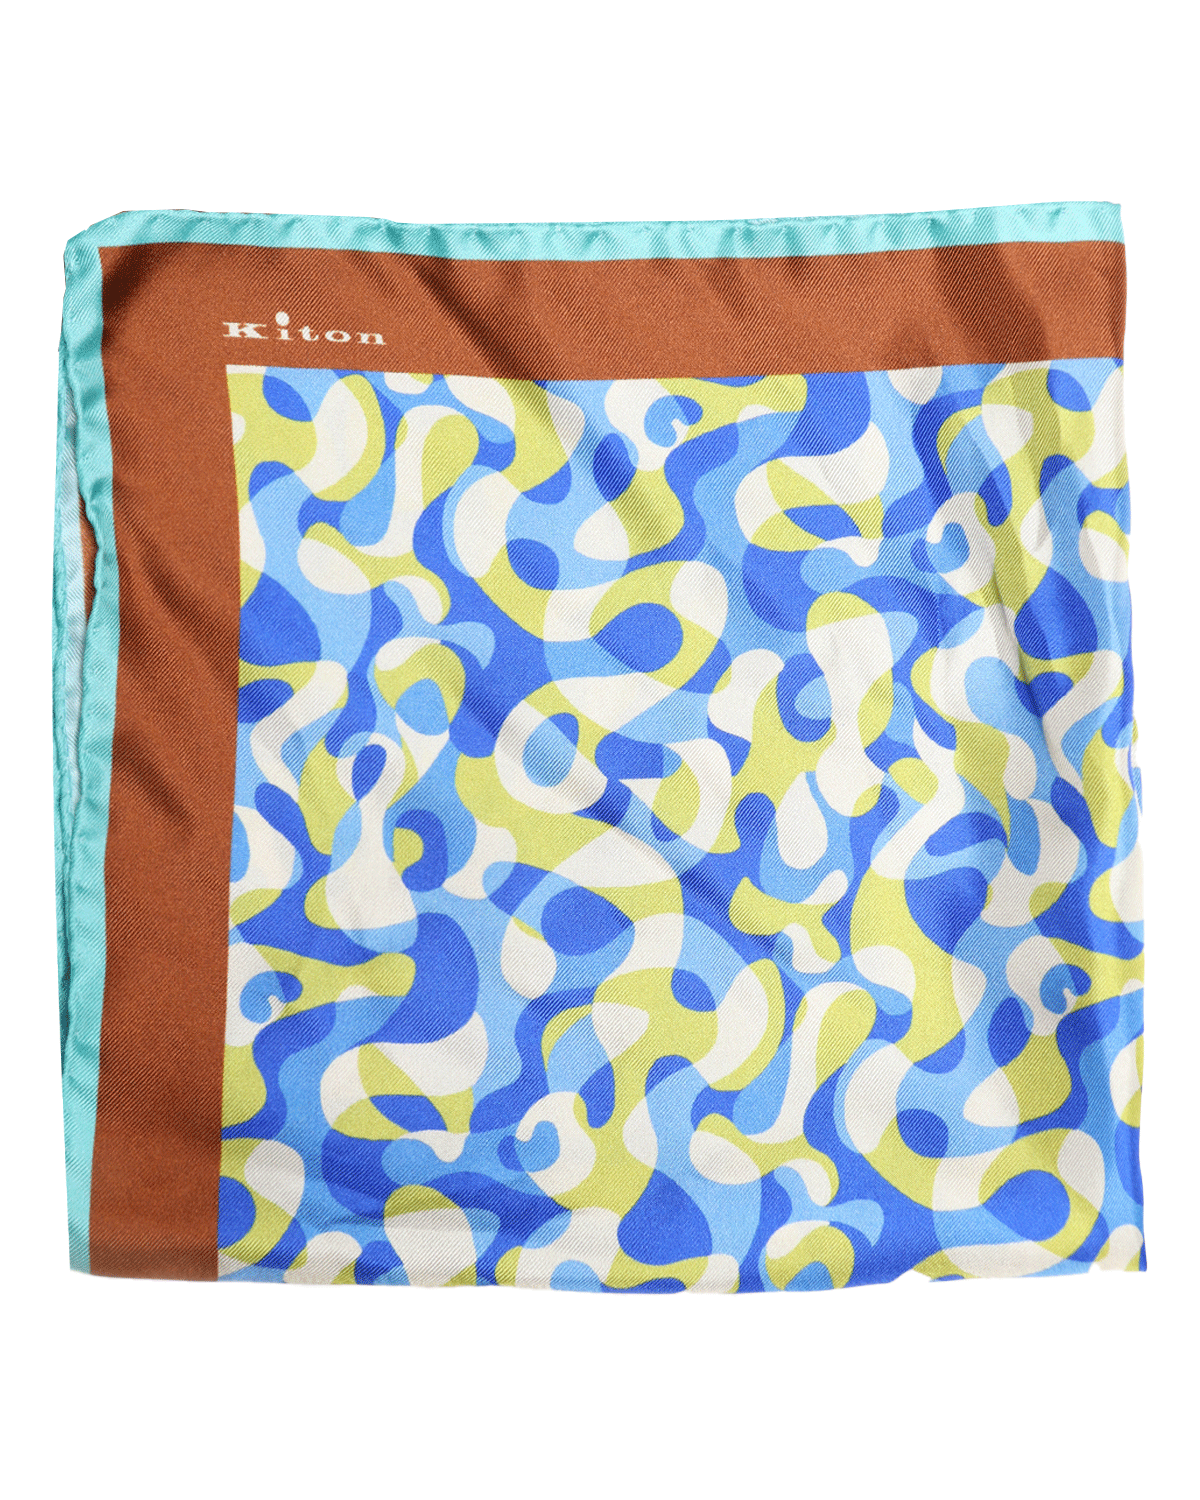 Sky Blue Gold and Beige Swirl Silk Pocket Square